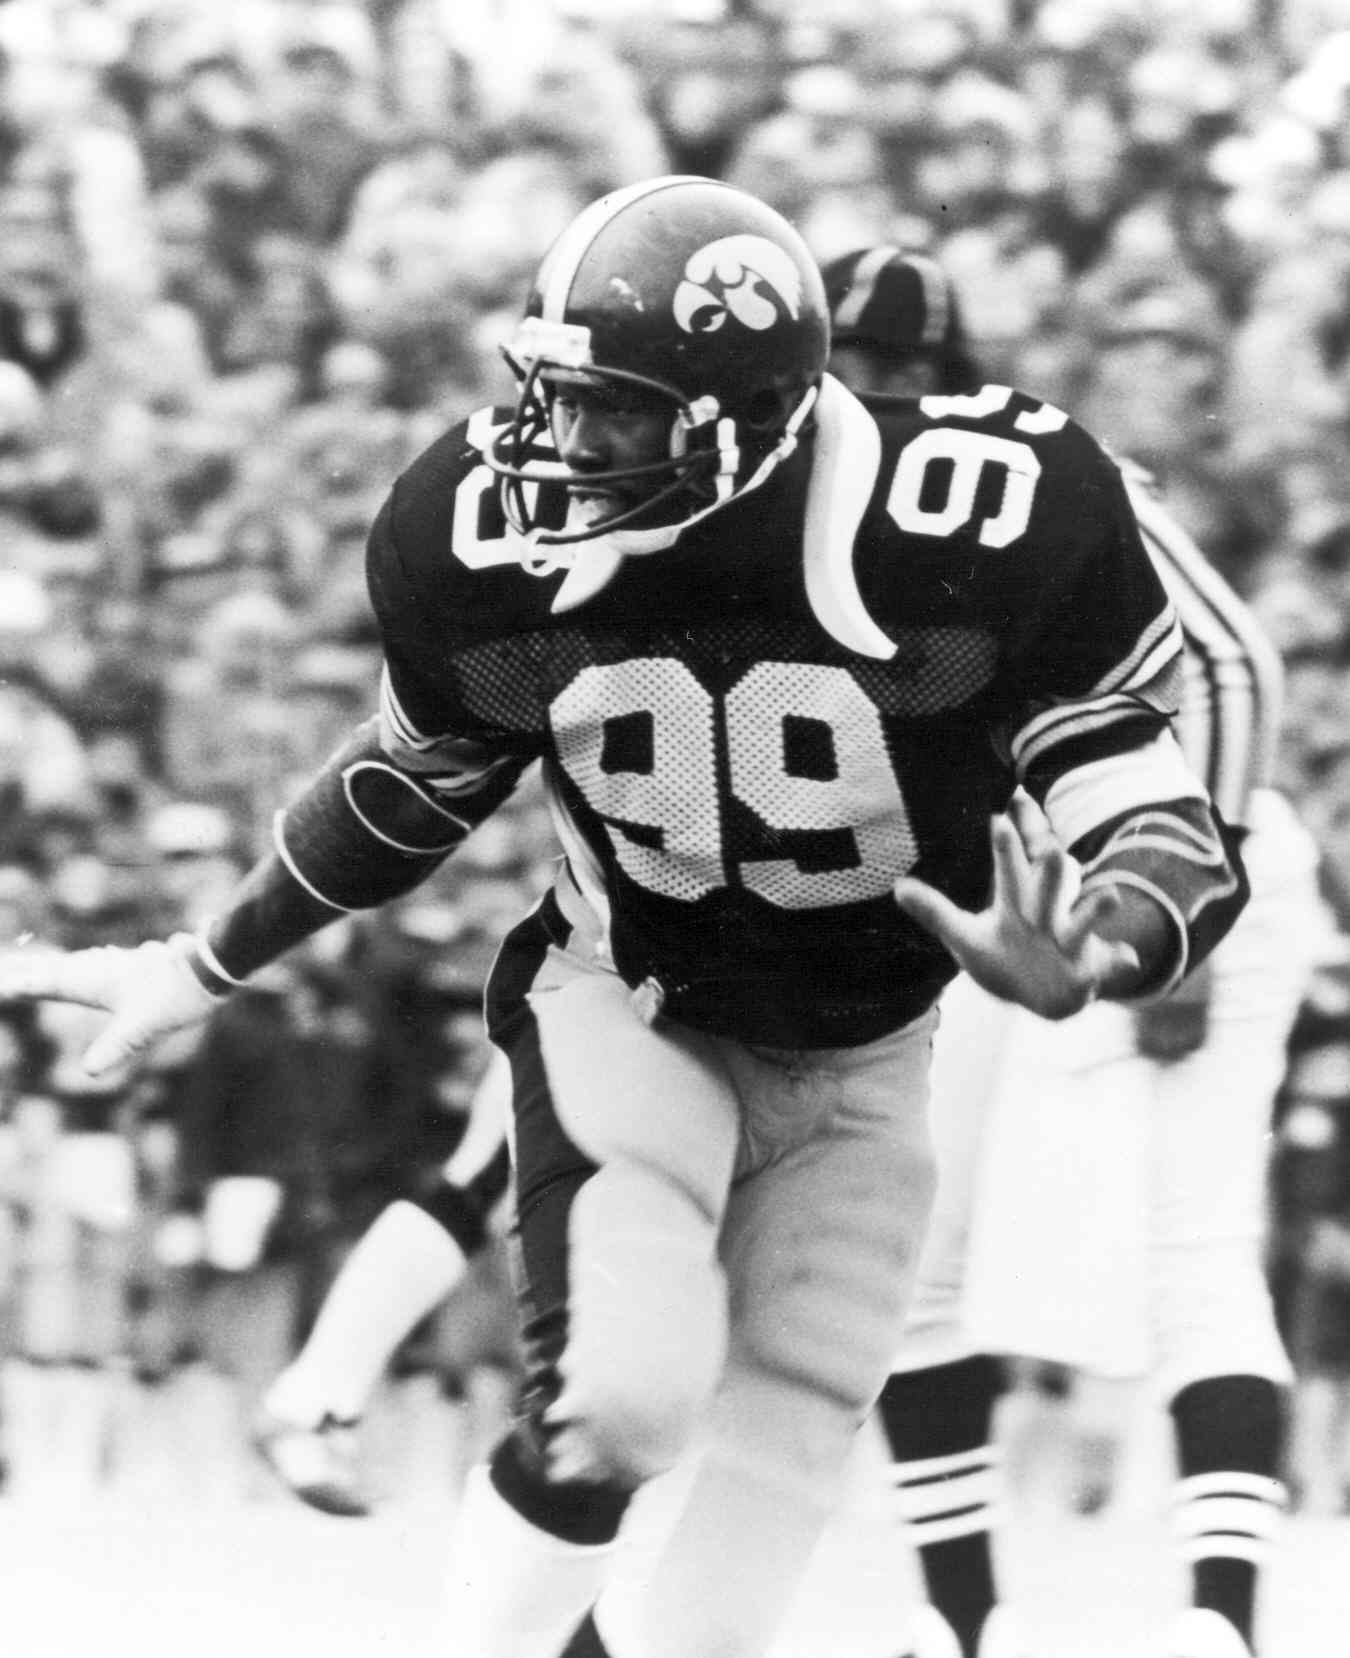 Andre Tippett: From Standing Up For Himself To The College Football Hall of Fame